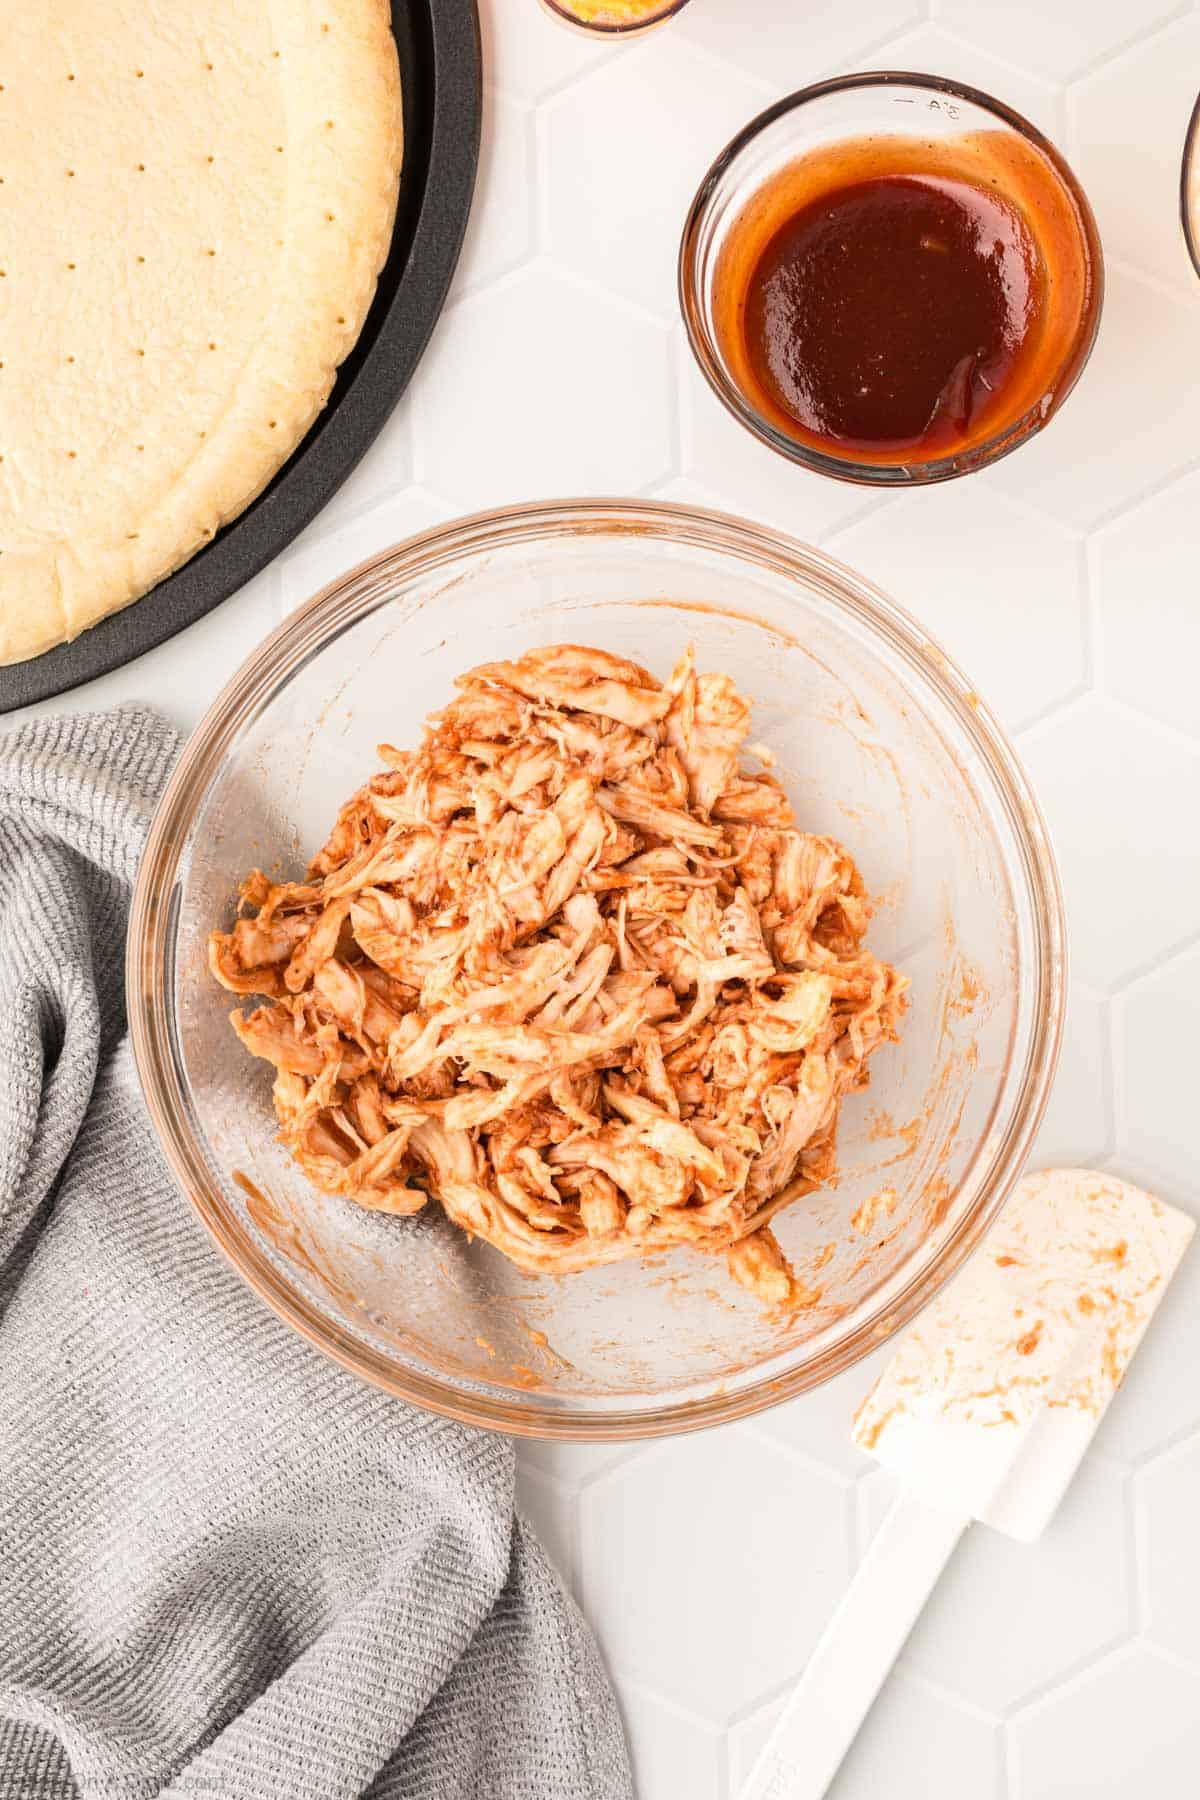 Shredded Chicken mixed with BBQ Sauce in a bowl